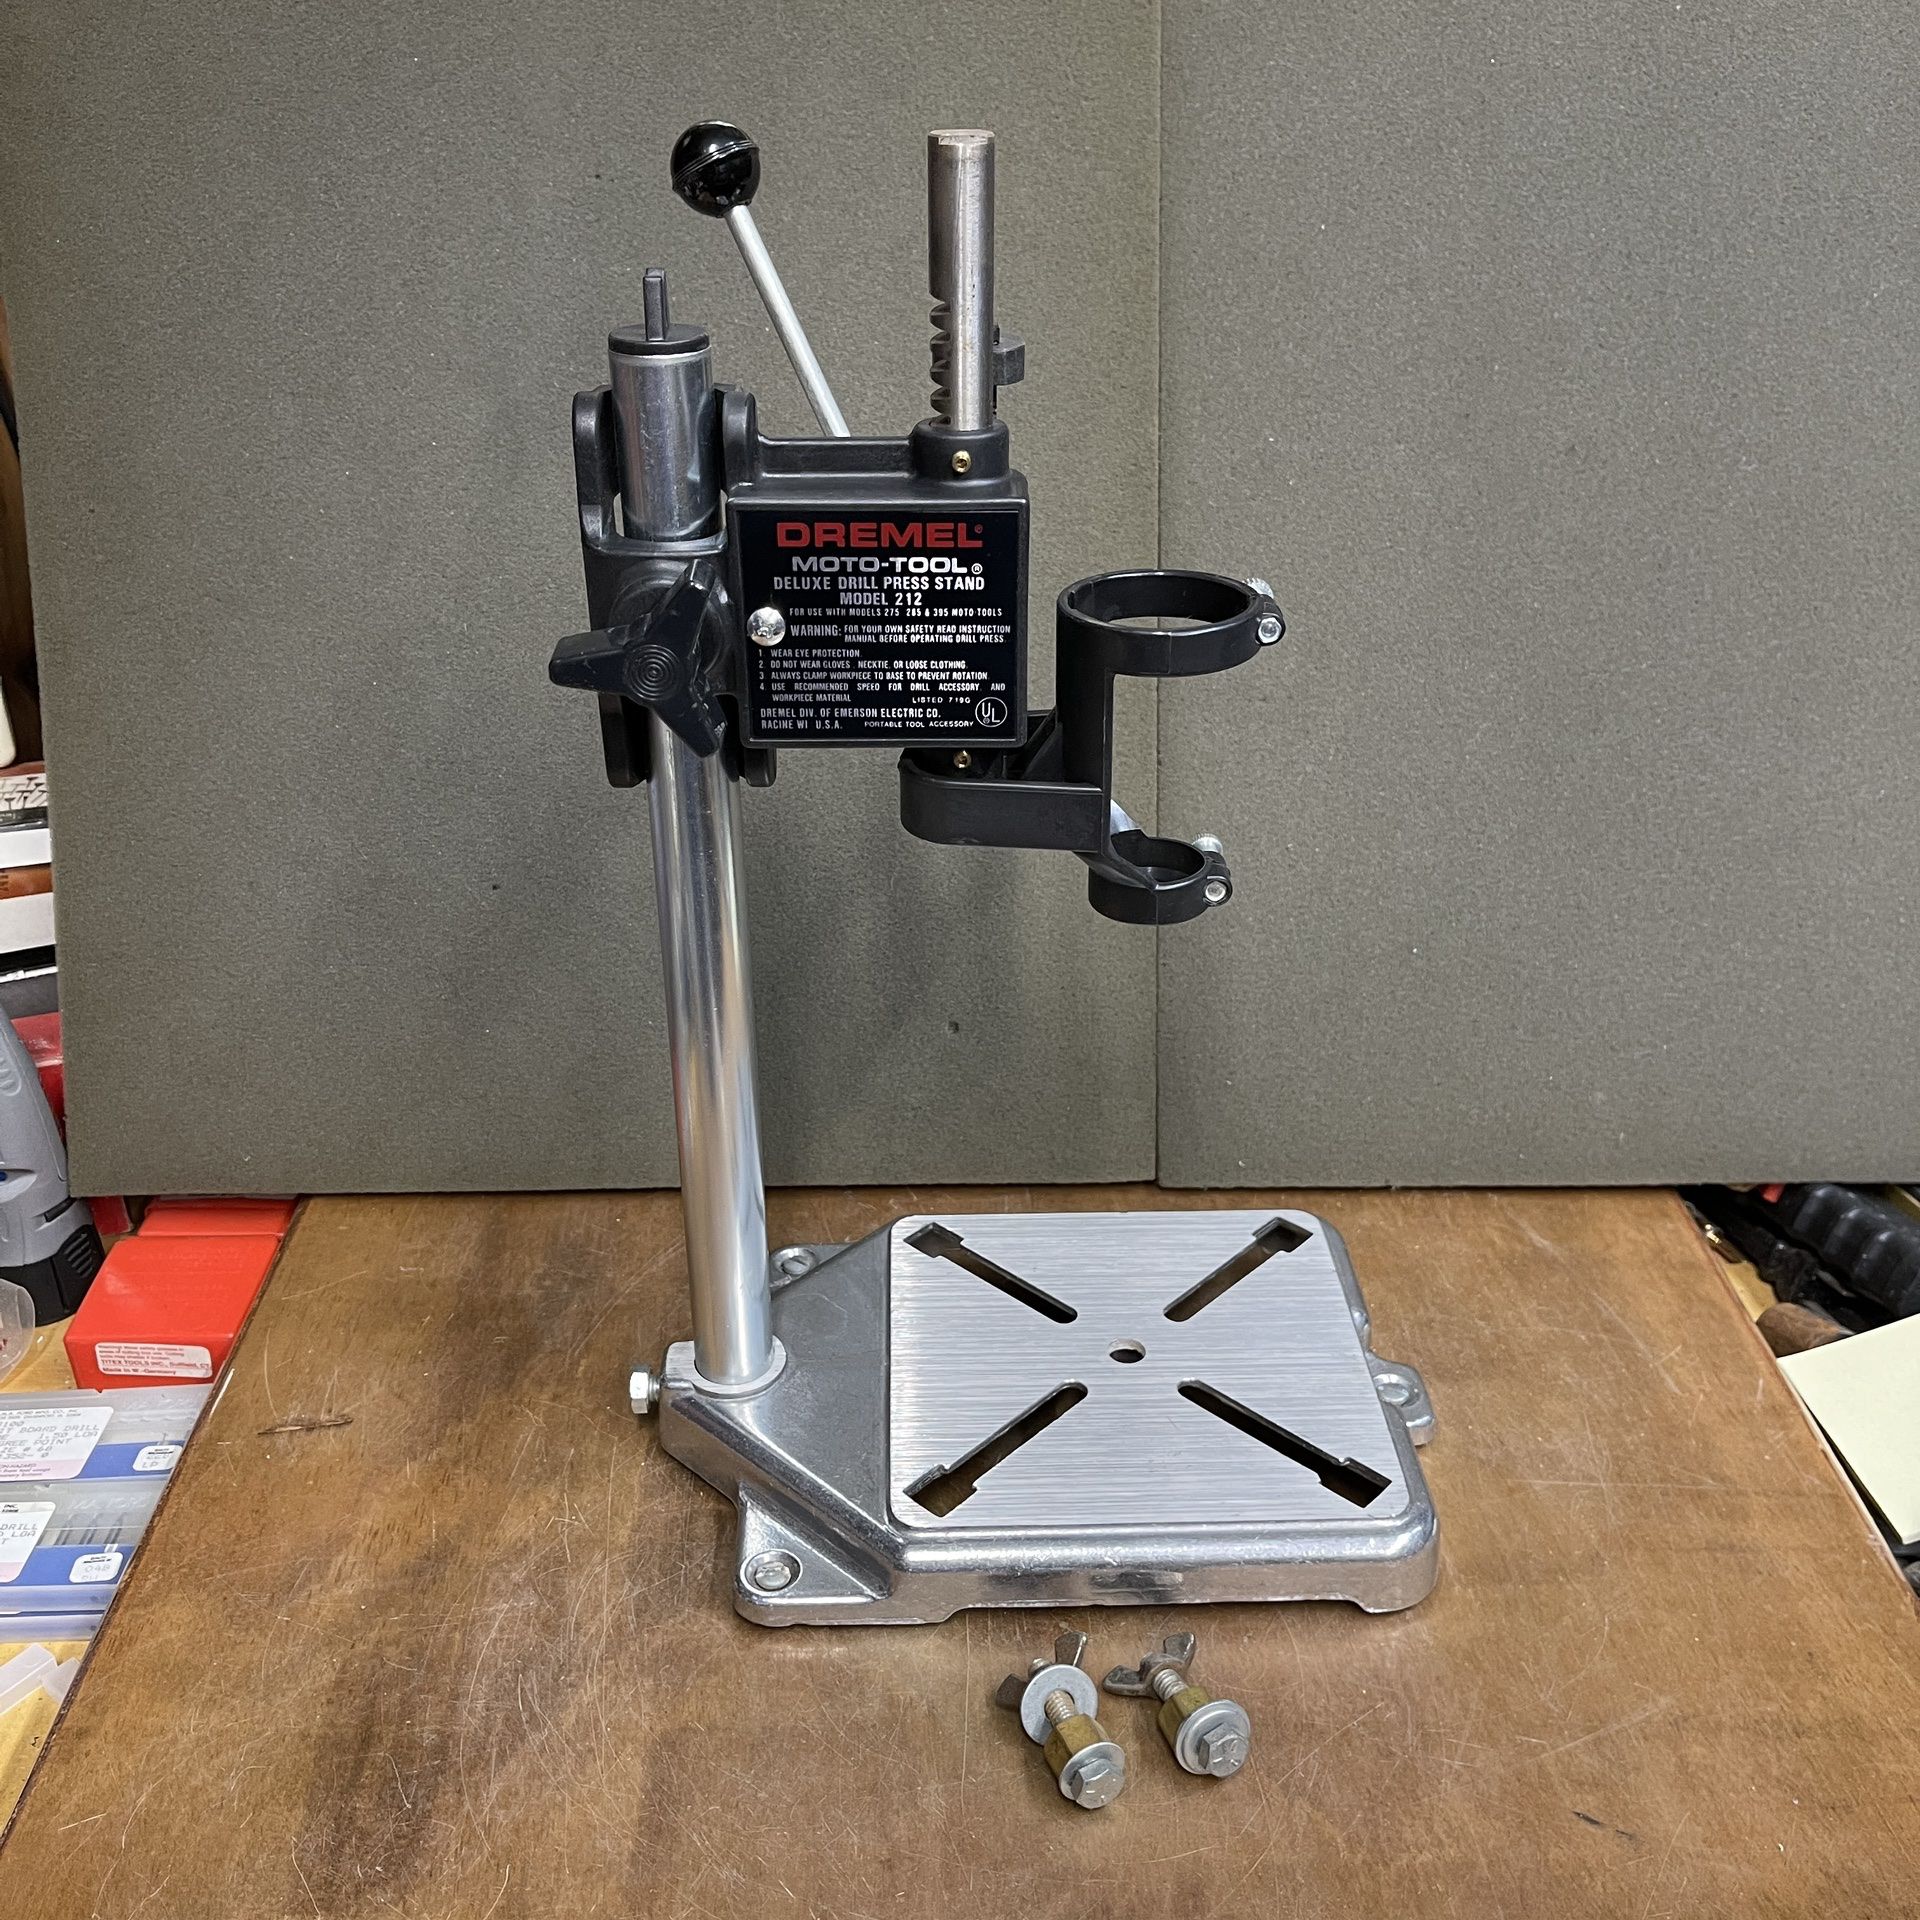 DREMEL MOTO-TOOL 212 DRILL PRESS for Sale in Los - OfferUp